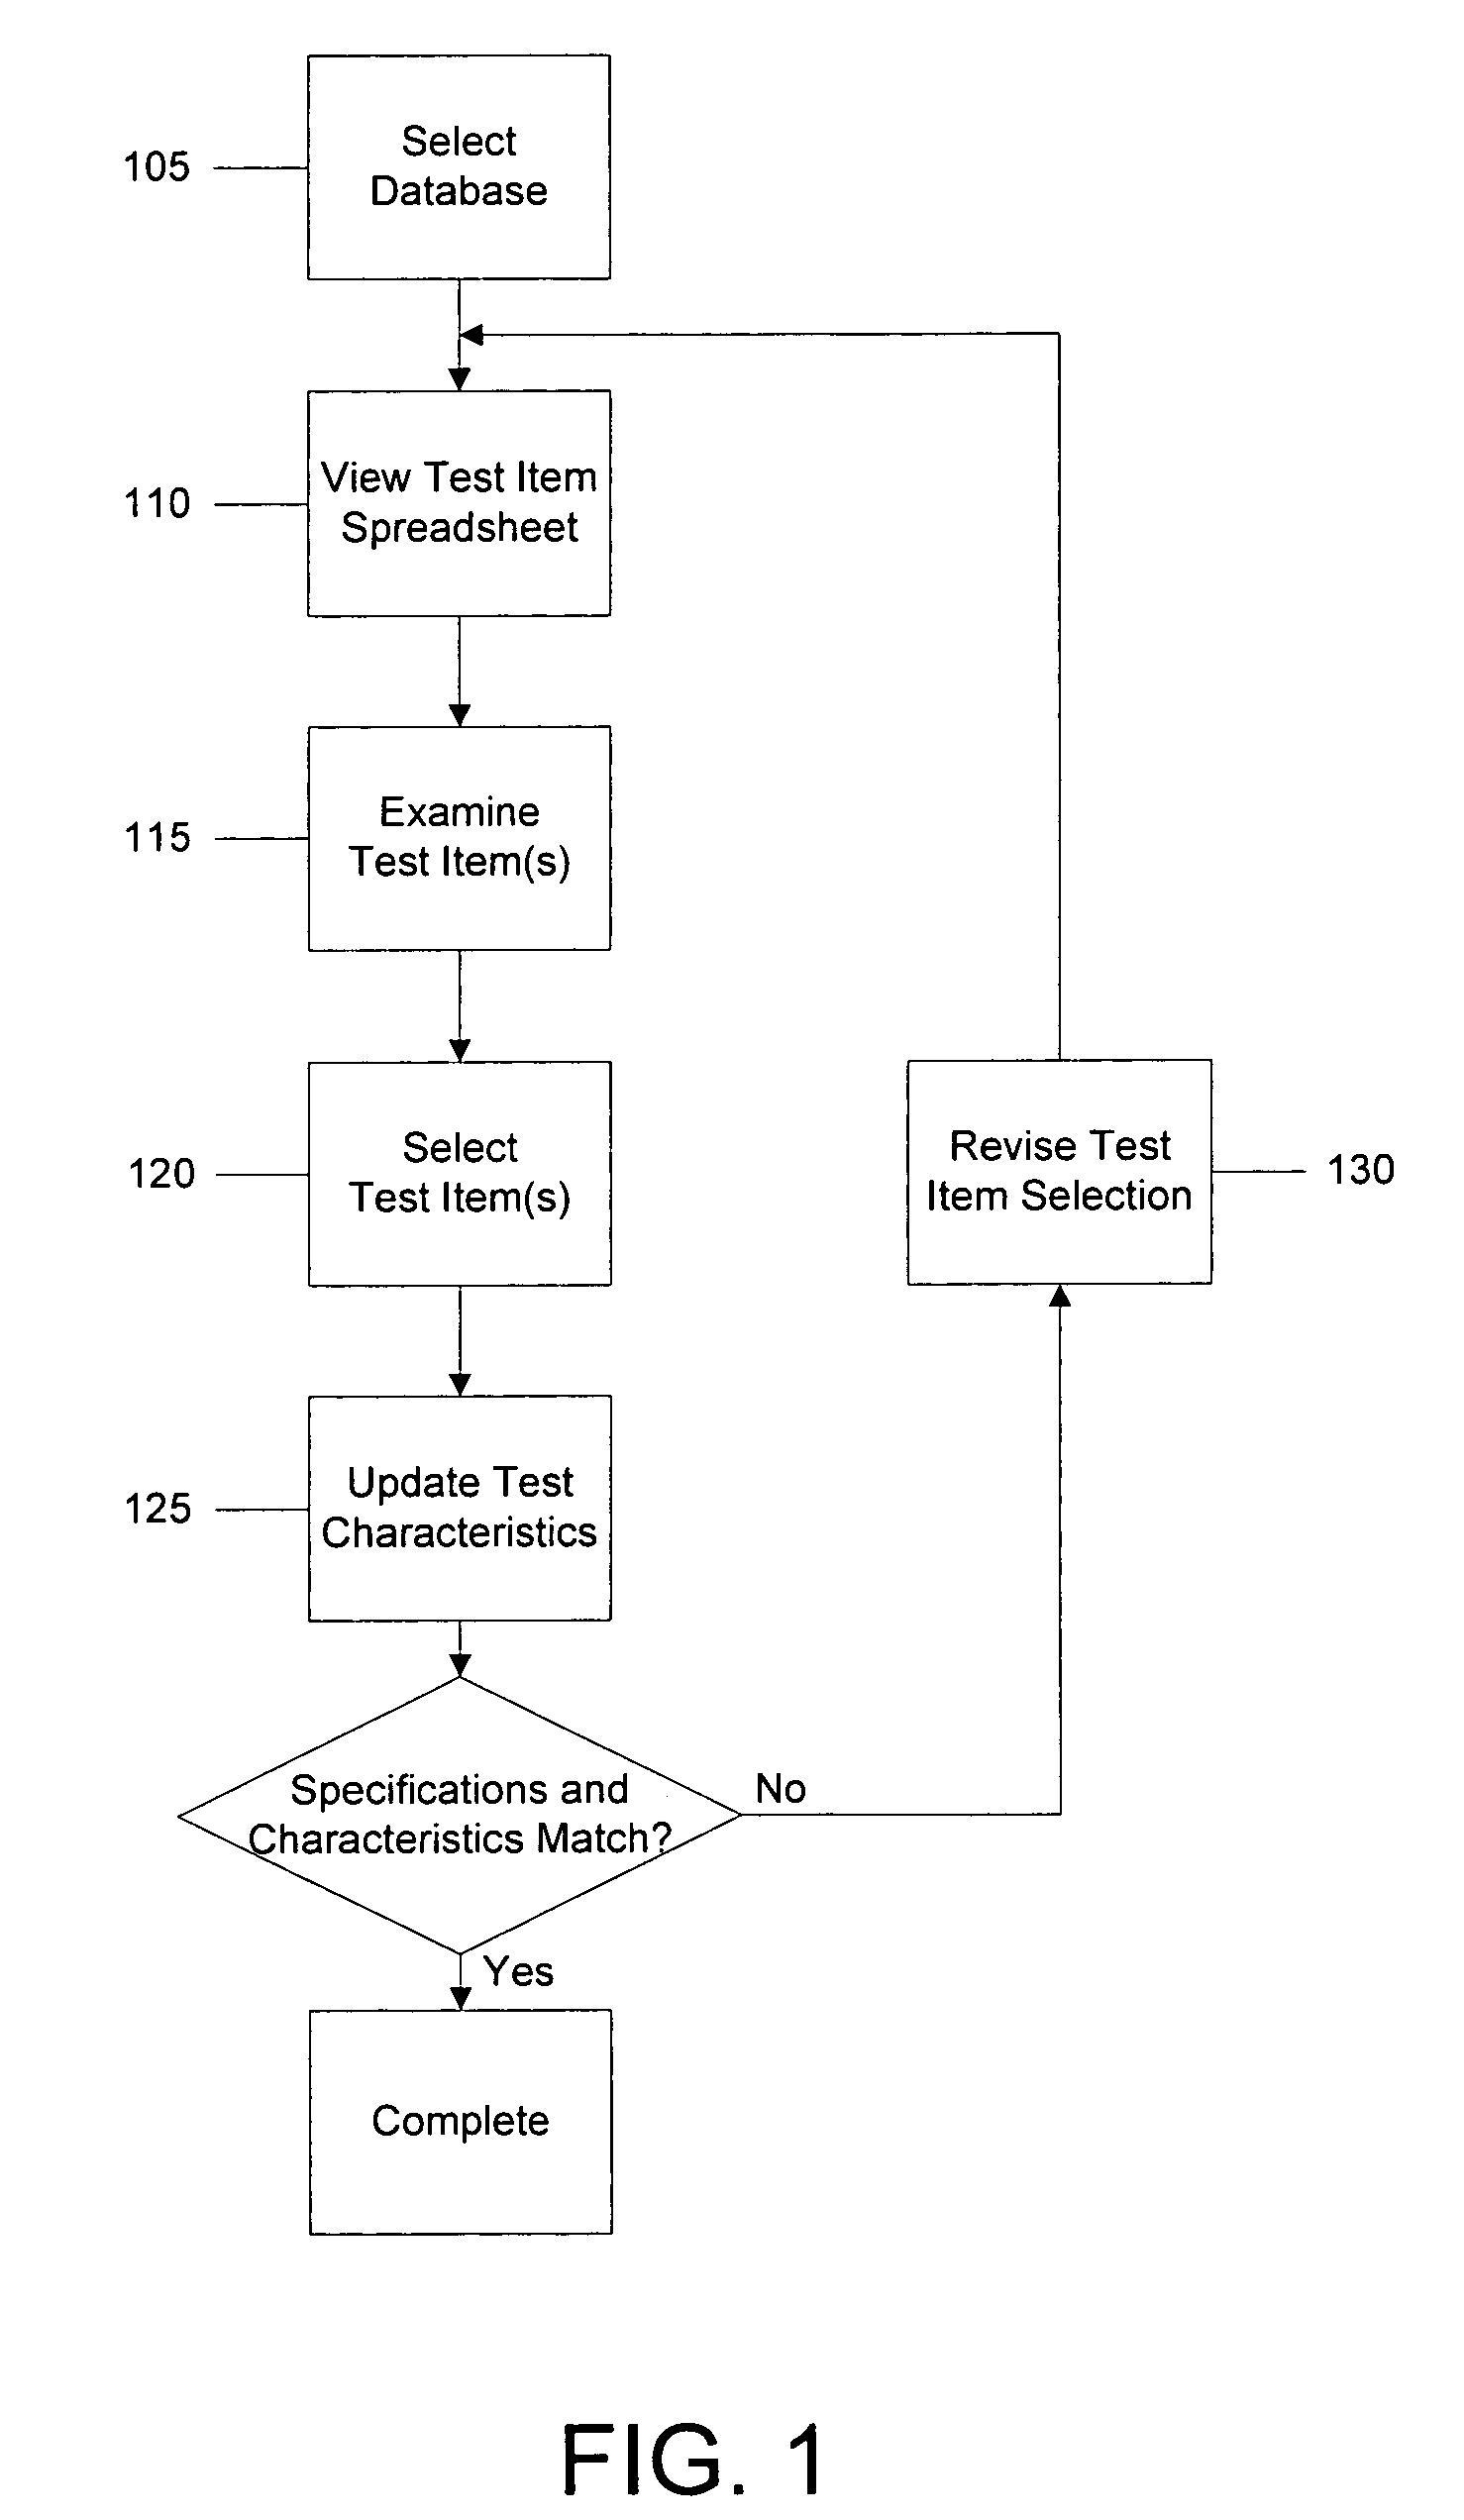 Method and system for computer-assisted test construction performing specification matching during test item selection